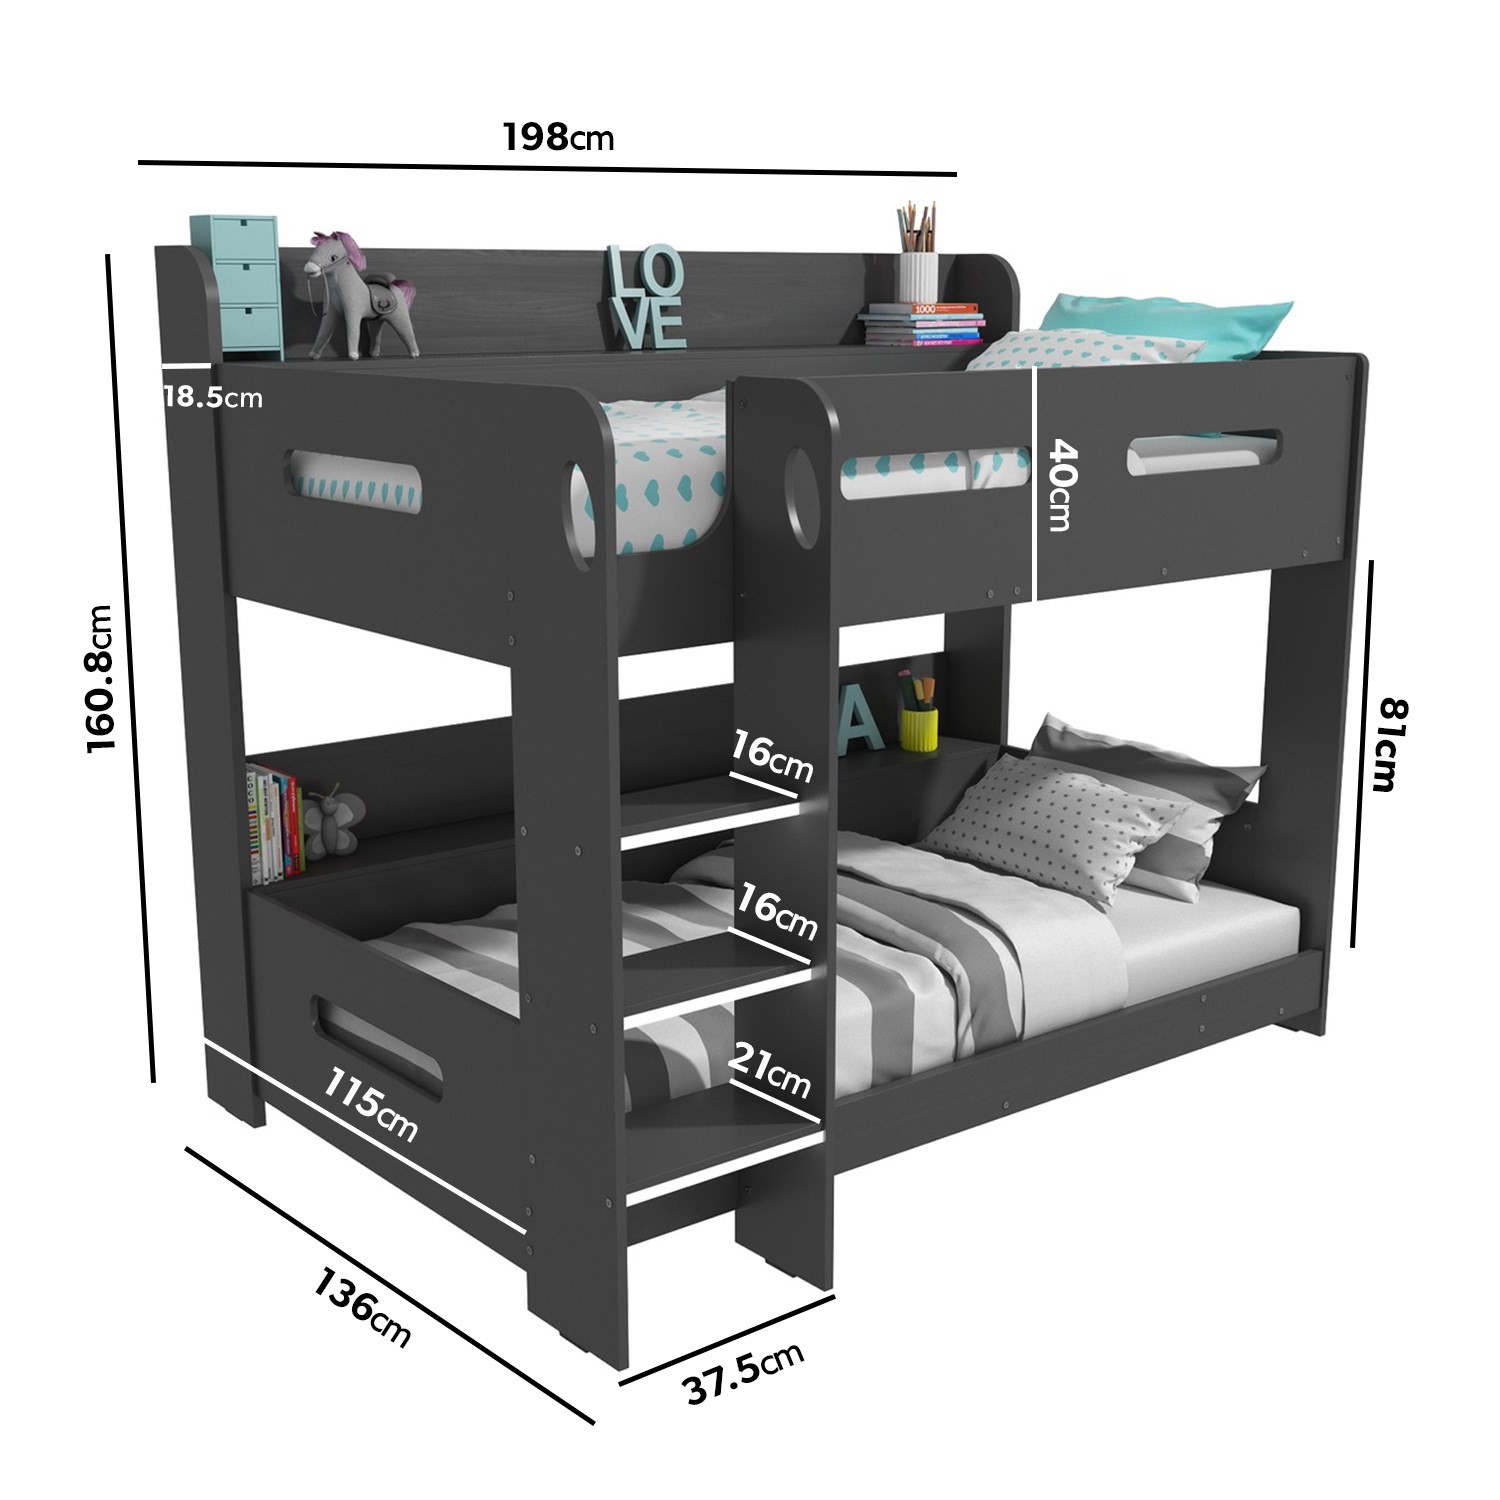 Read more about Dark grey bunk bed with storage shelves ladder can be fitted either side